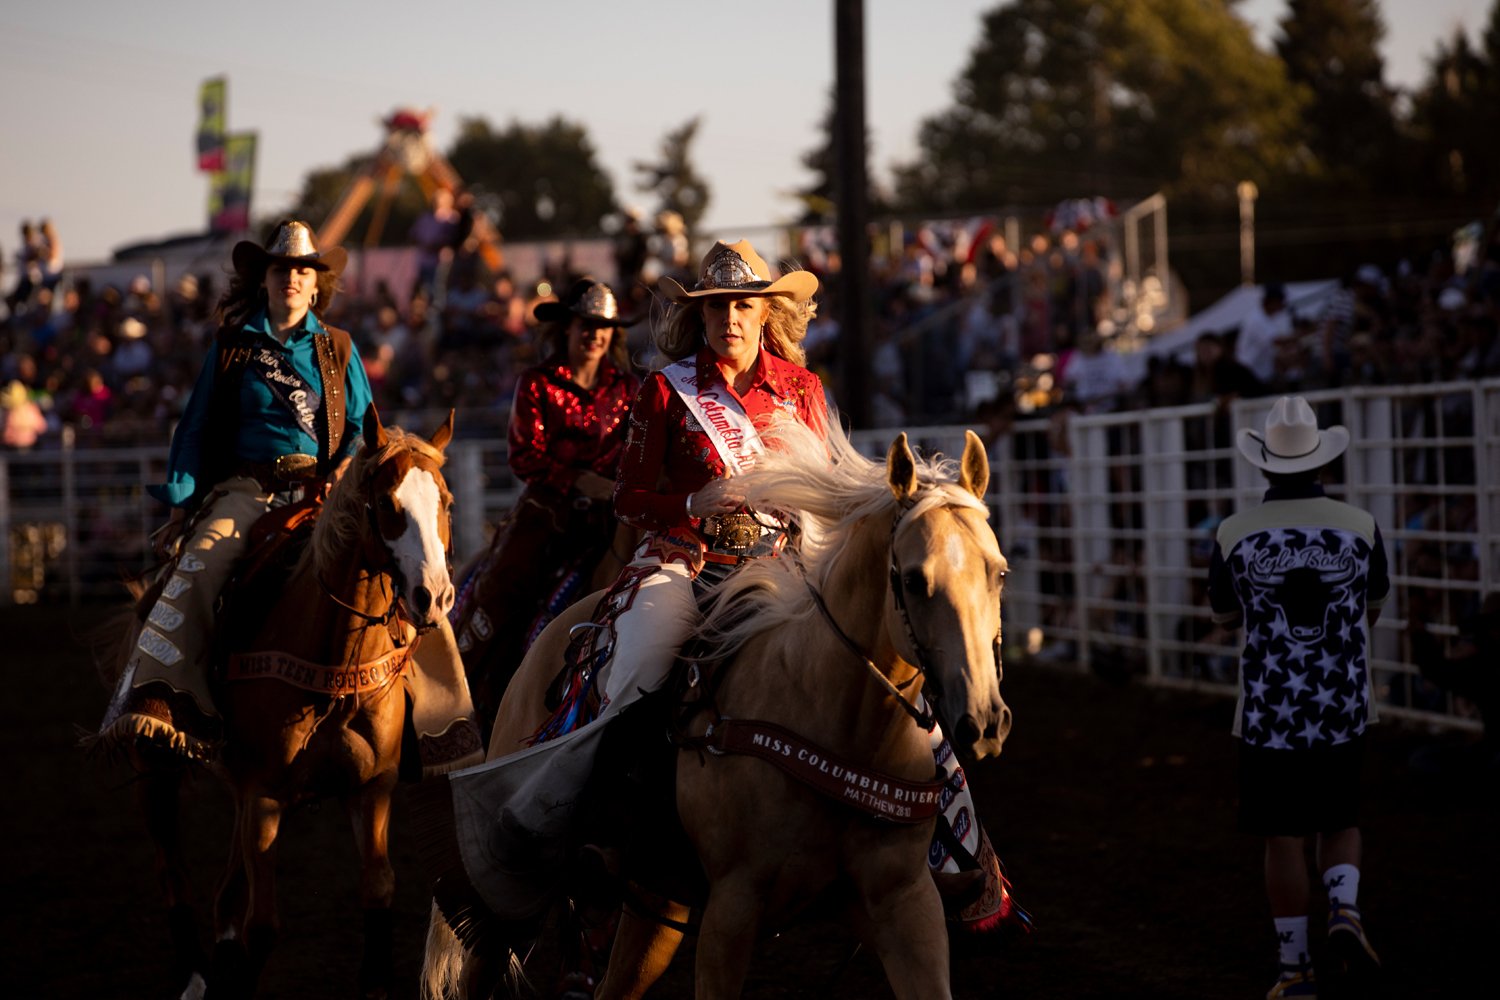  Rodeo Court members leave the area after interacting with the crowd Saturday during the Columbia County Fair and Rodeo in St Helens, Ore. 